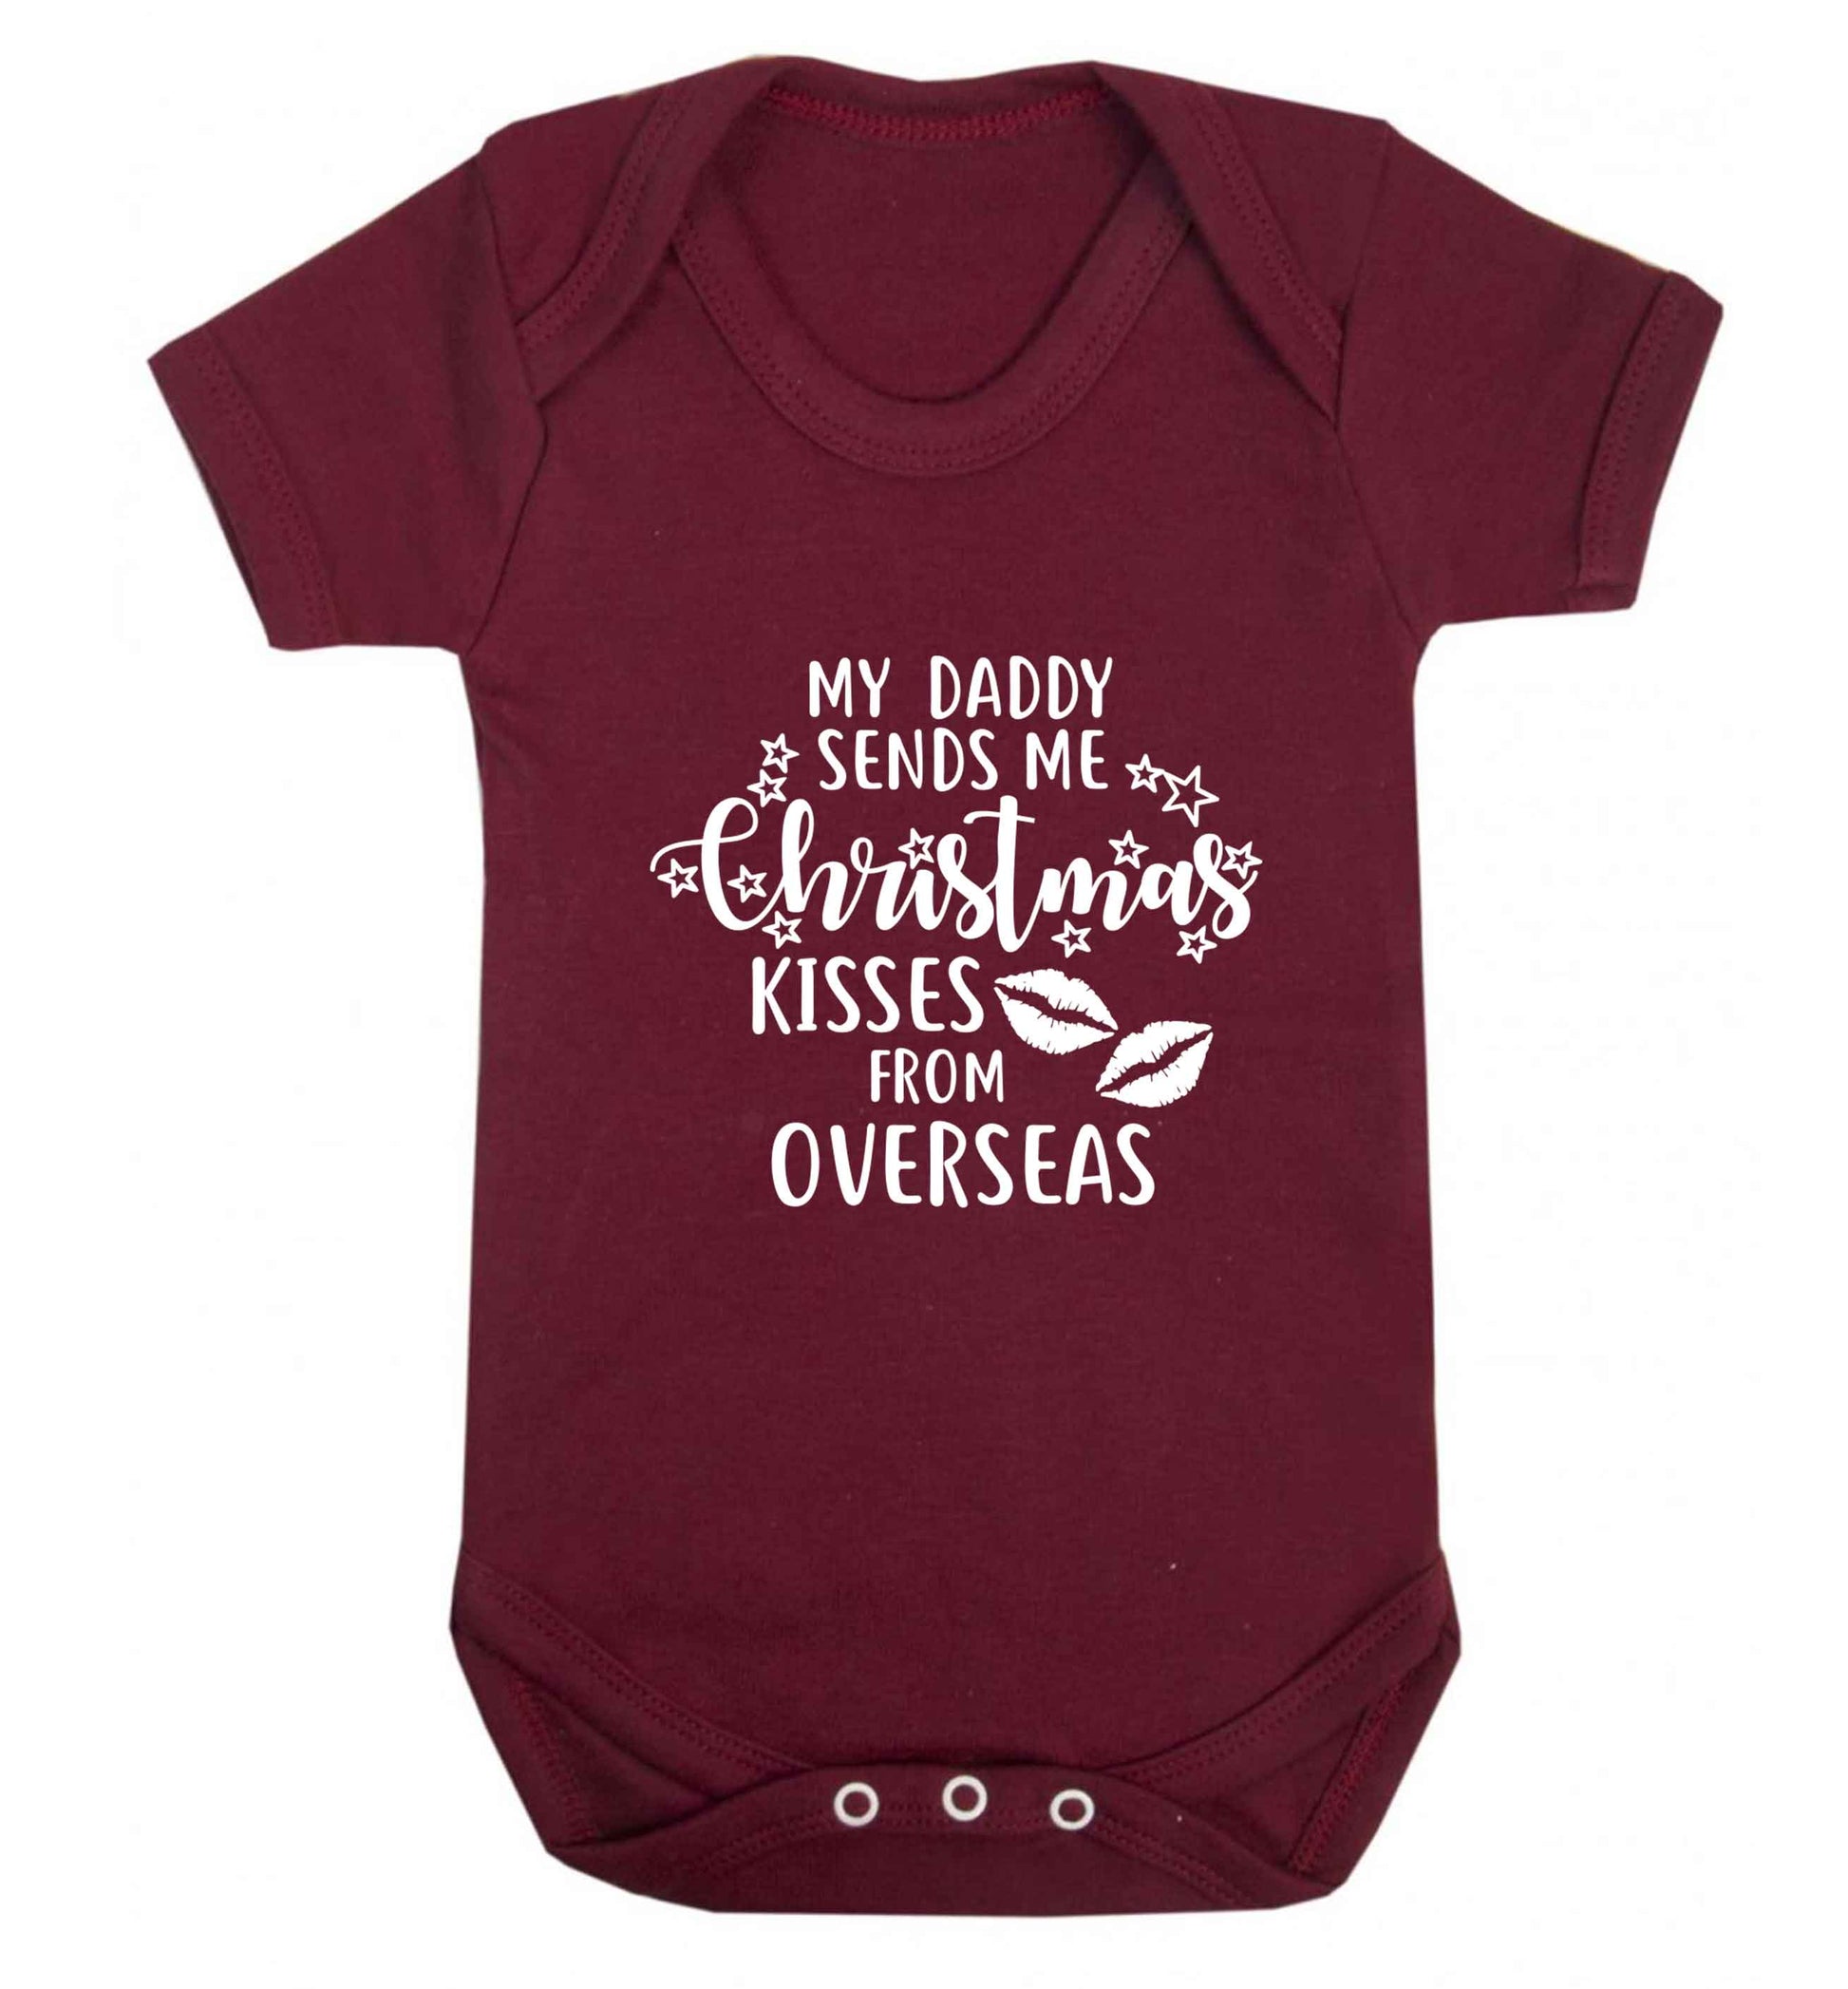 Daddy Christmas Kisses Overseas baby vest maroon 18-24 months